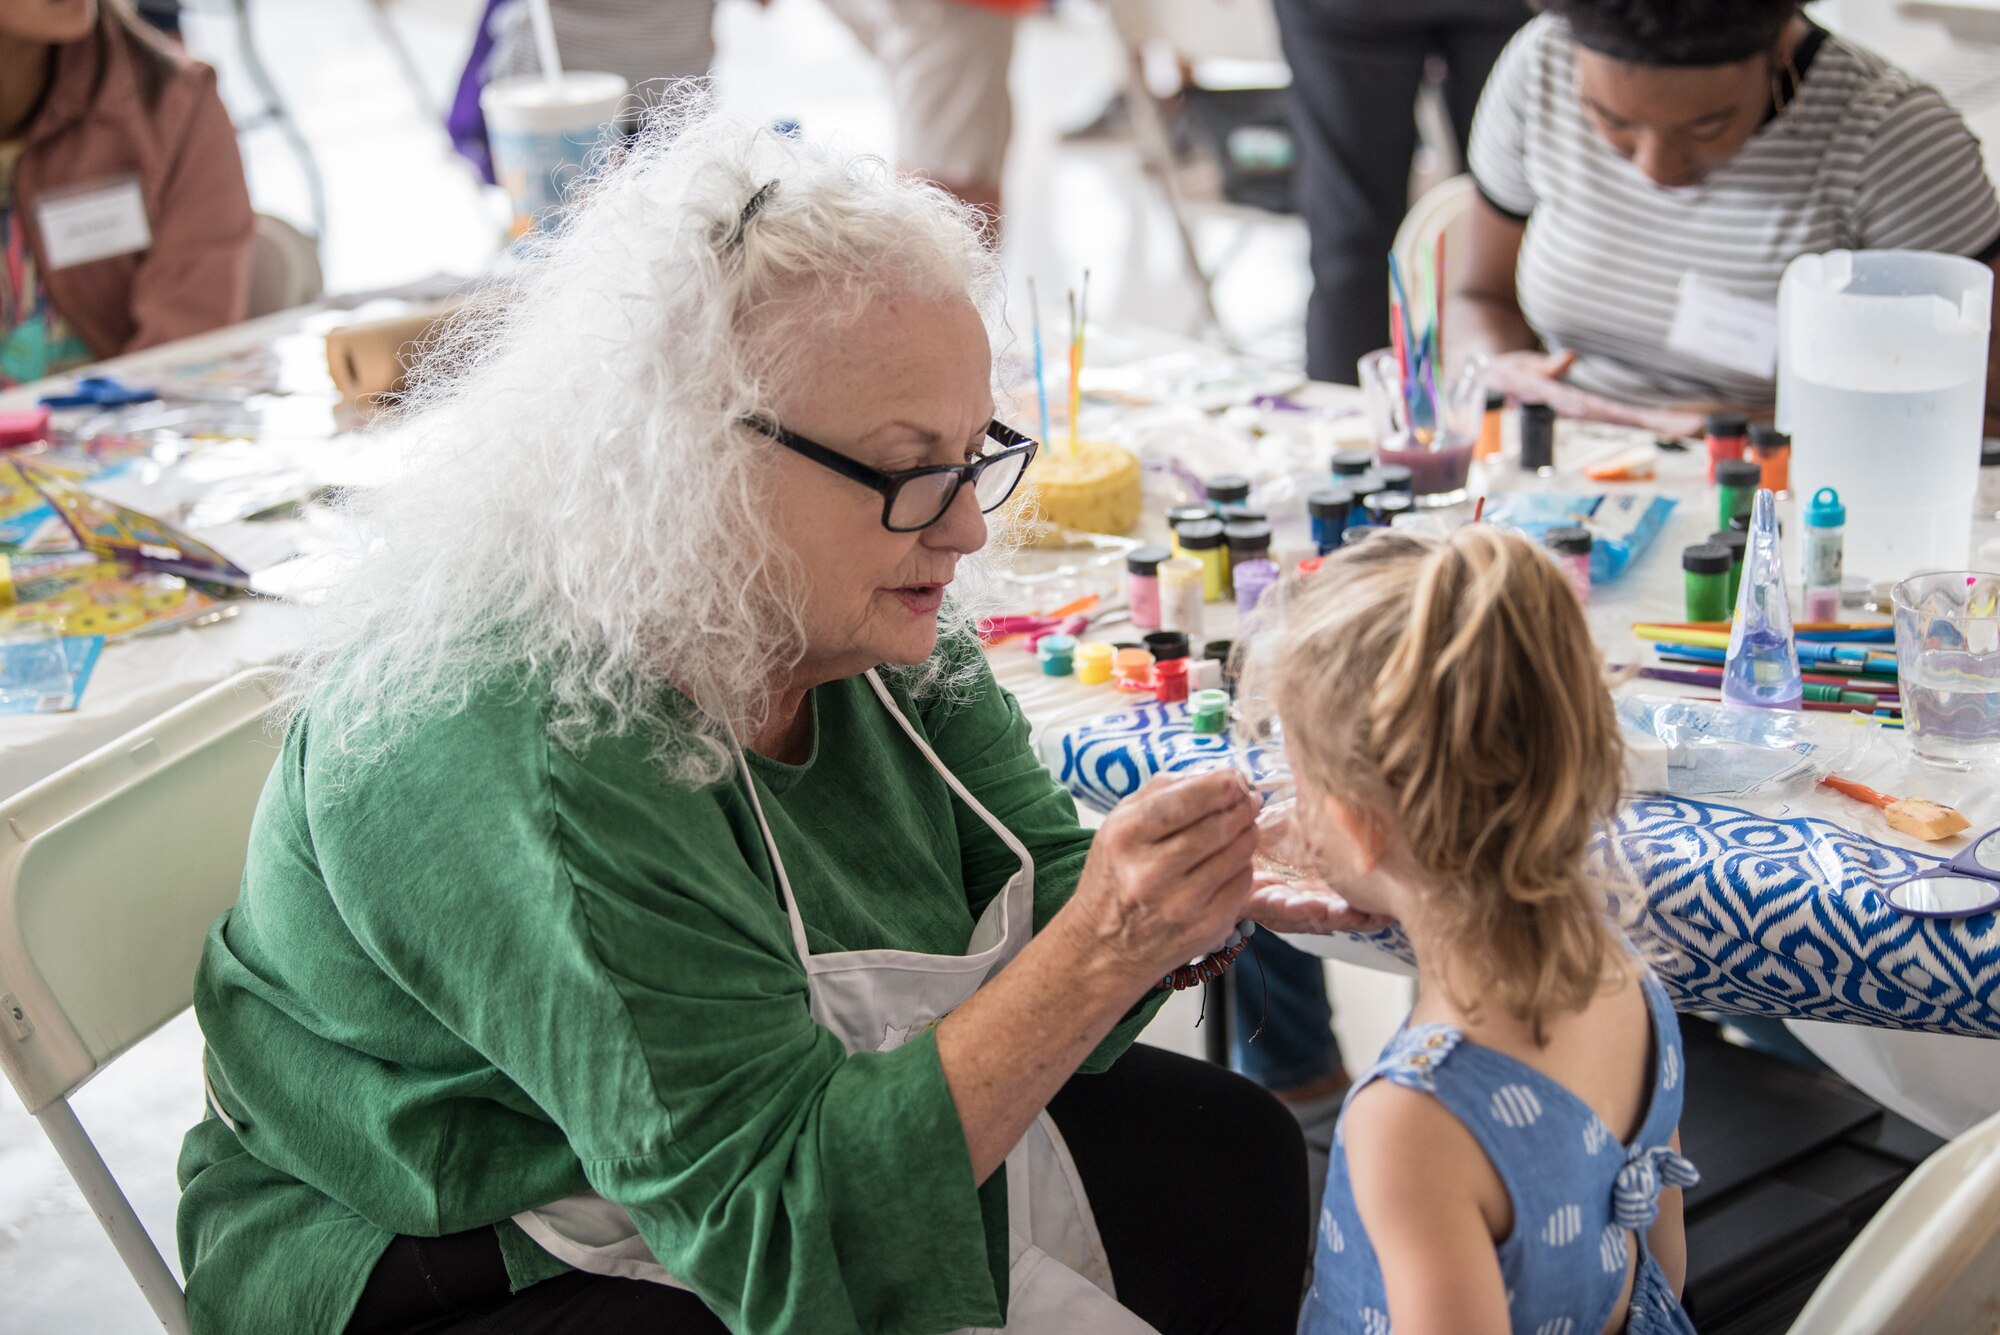 A volunteer paints a child’s face during the 123rd Airlift Wing’s Family Day at the Kentucky Air National Guard base in Louisville, Ky., on Sept. 16, 2018. The event, which was sponsored by the Airman and Family Readiness Office and the Key Volunteer Group, featured a car show, a static-display C-130 Hercules aircraft and several other activities. (U.S. Air National Guard photo by Master Sgt. Phil Speck)